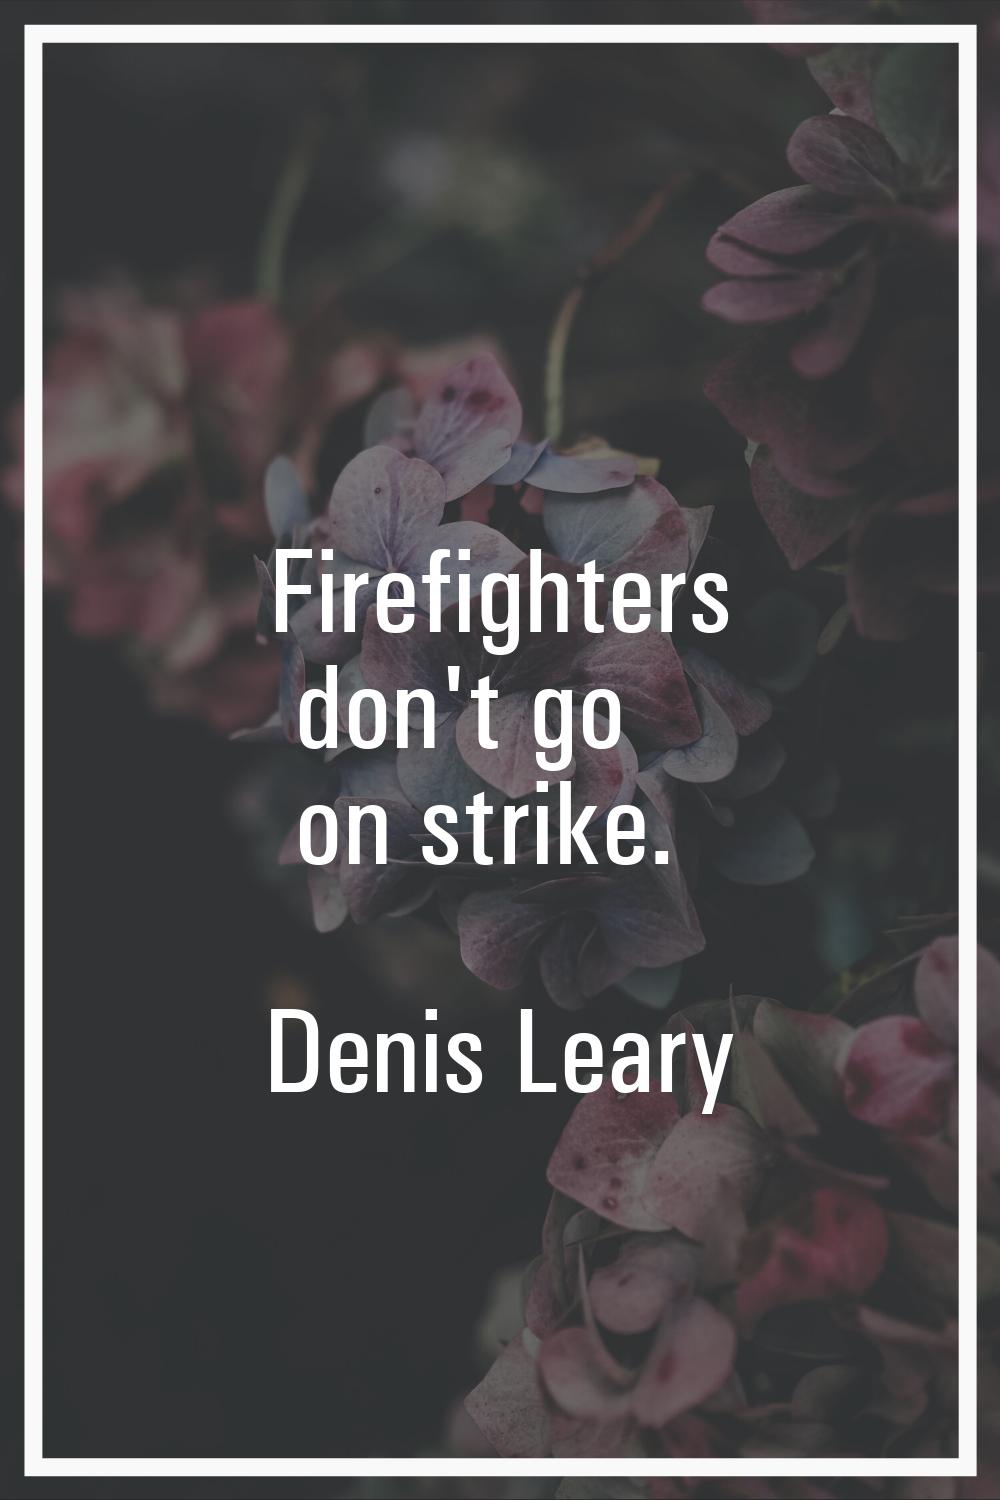 Firefighters don't go on strike.